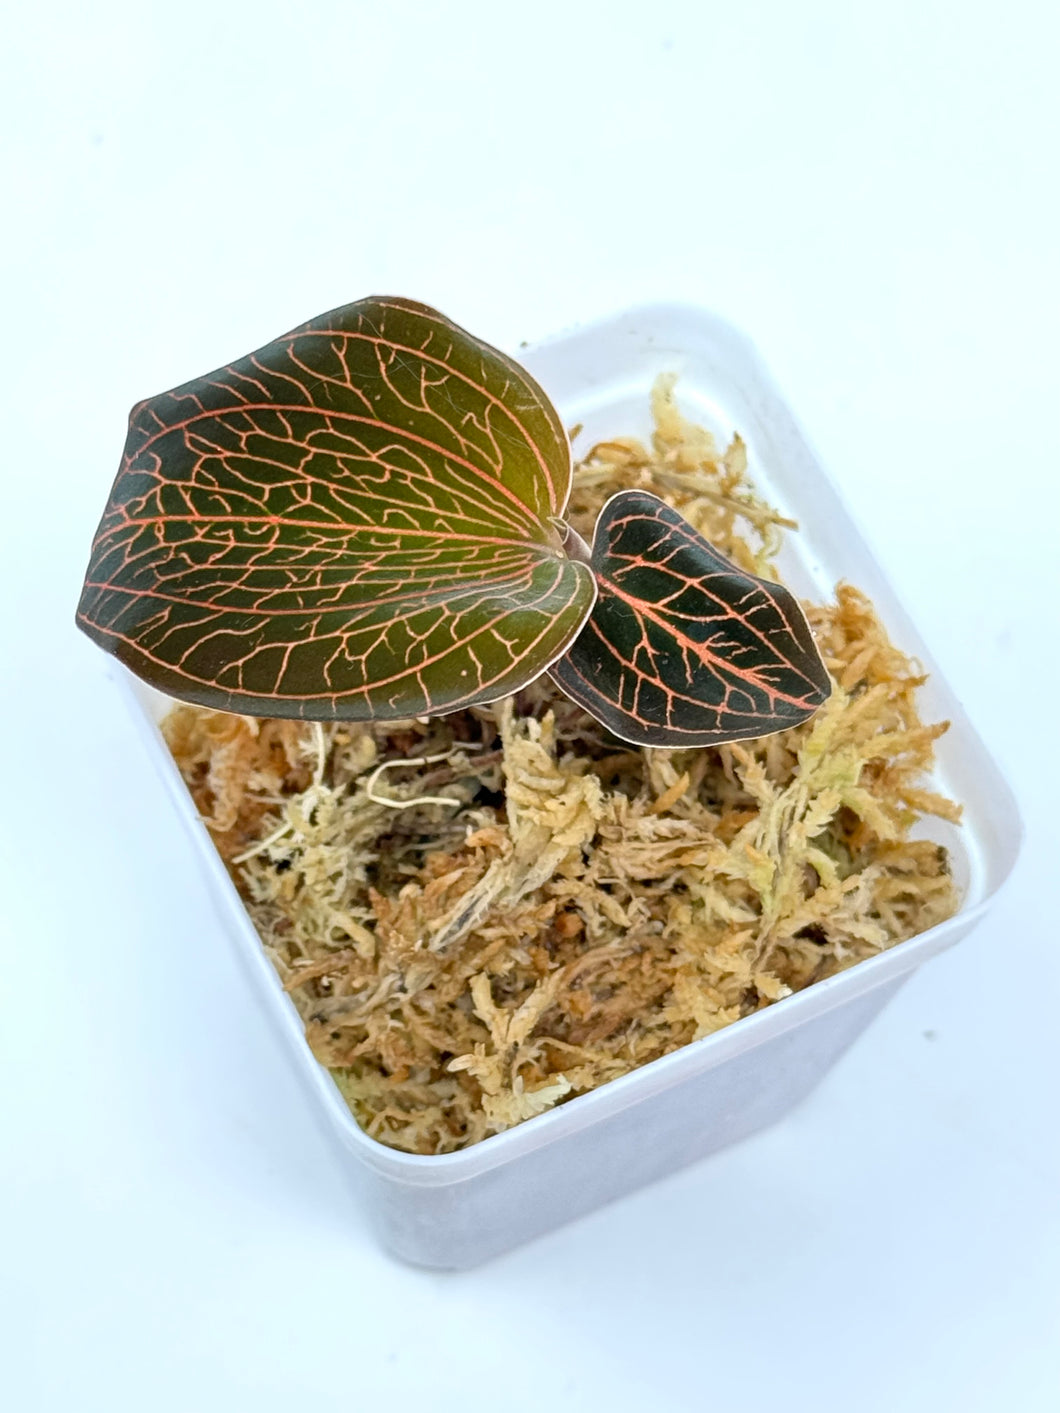 Anoectochilus Roxburghii 'Rose Gold' (Jewel Orchid) - Ships within Canada only